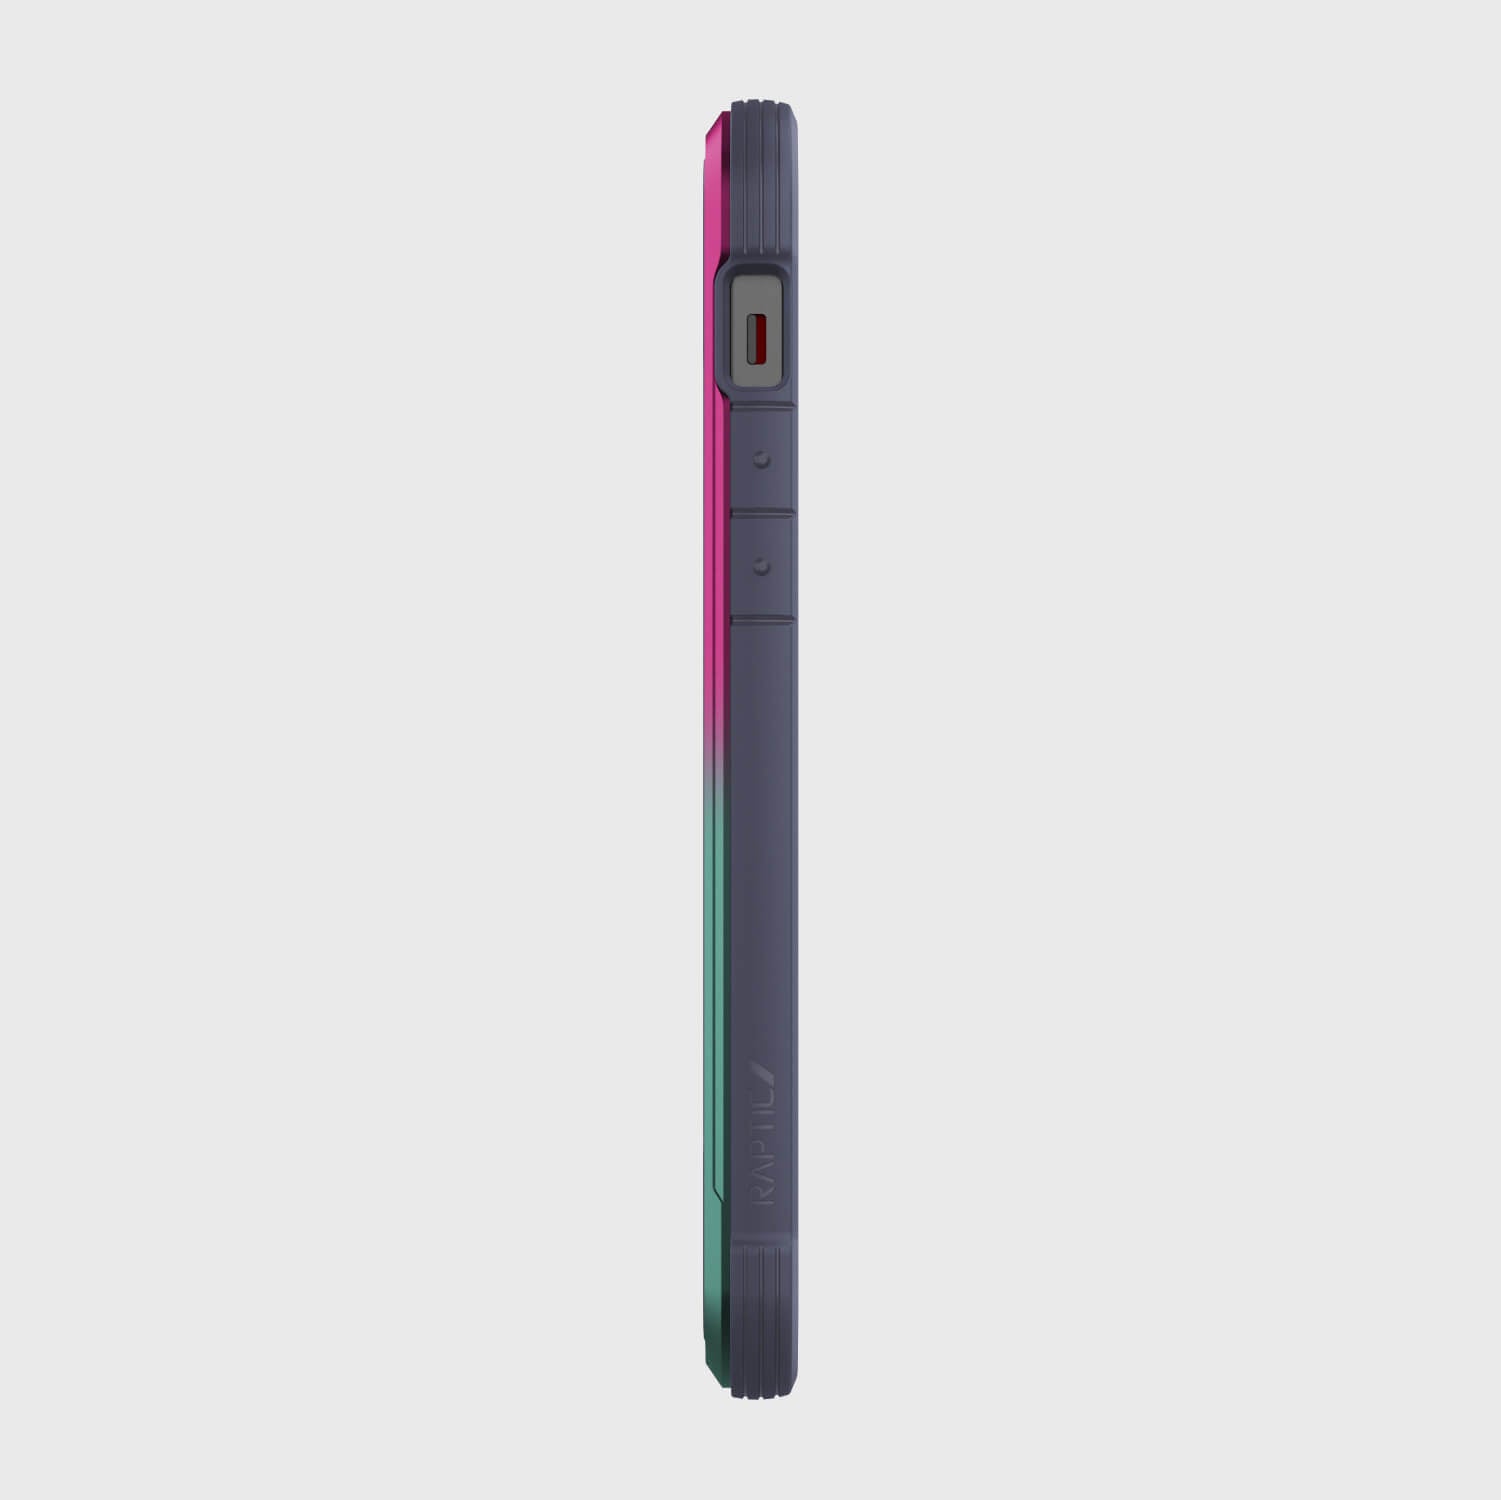 The SHIELD case for iPhone 12 Pro Max by Raptic, featuring a pink, green, and blue stripe design, offers foot drop protection.